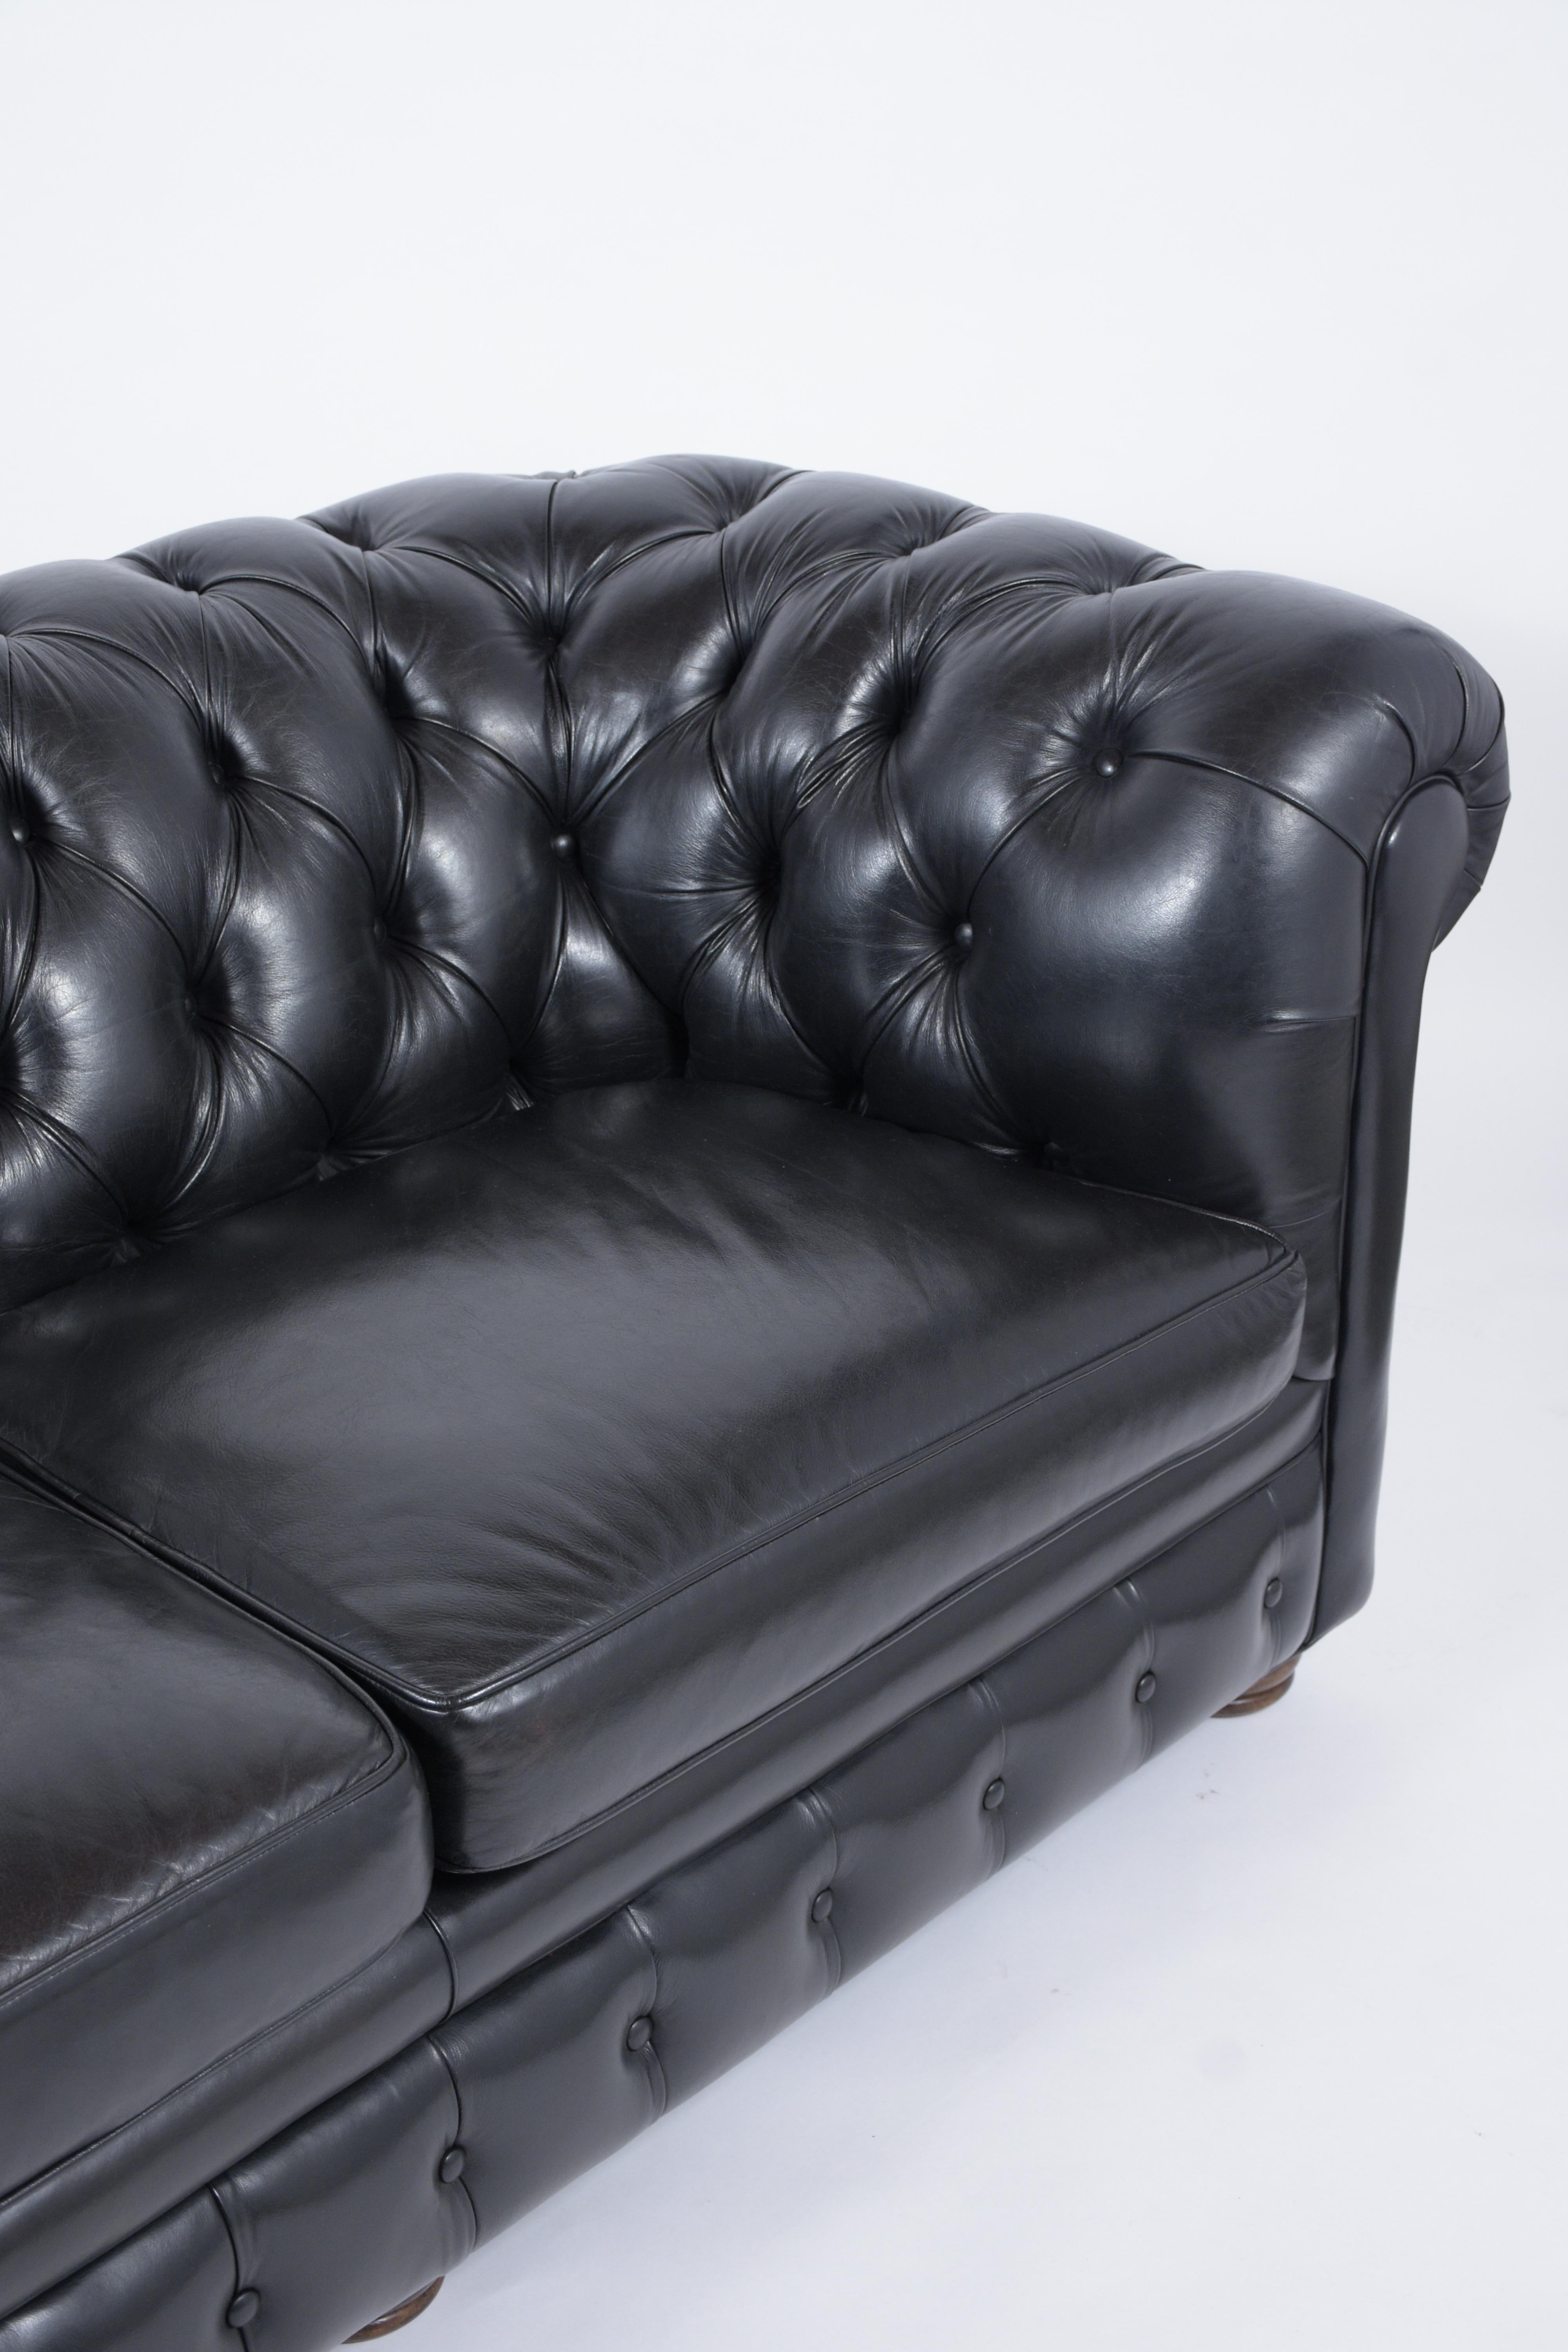 Chesterfield Tufted Leather Sofa 3